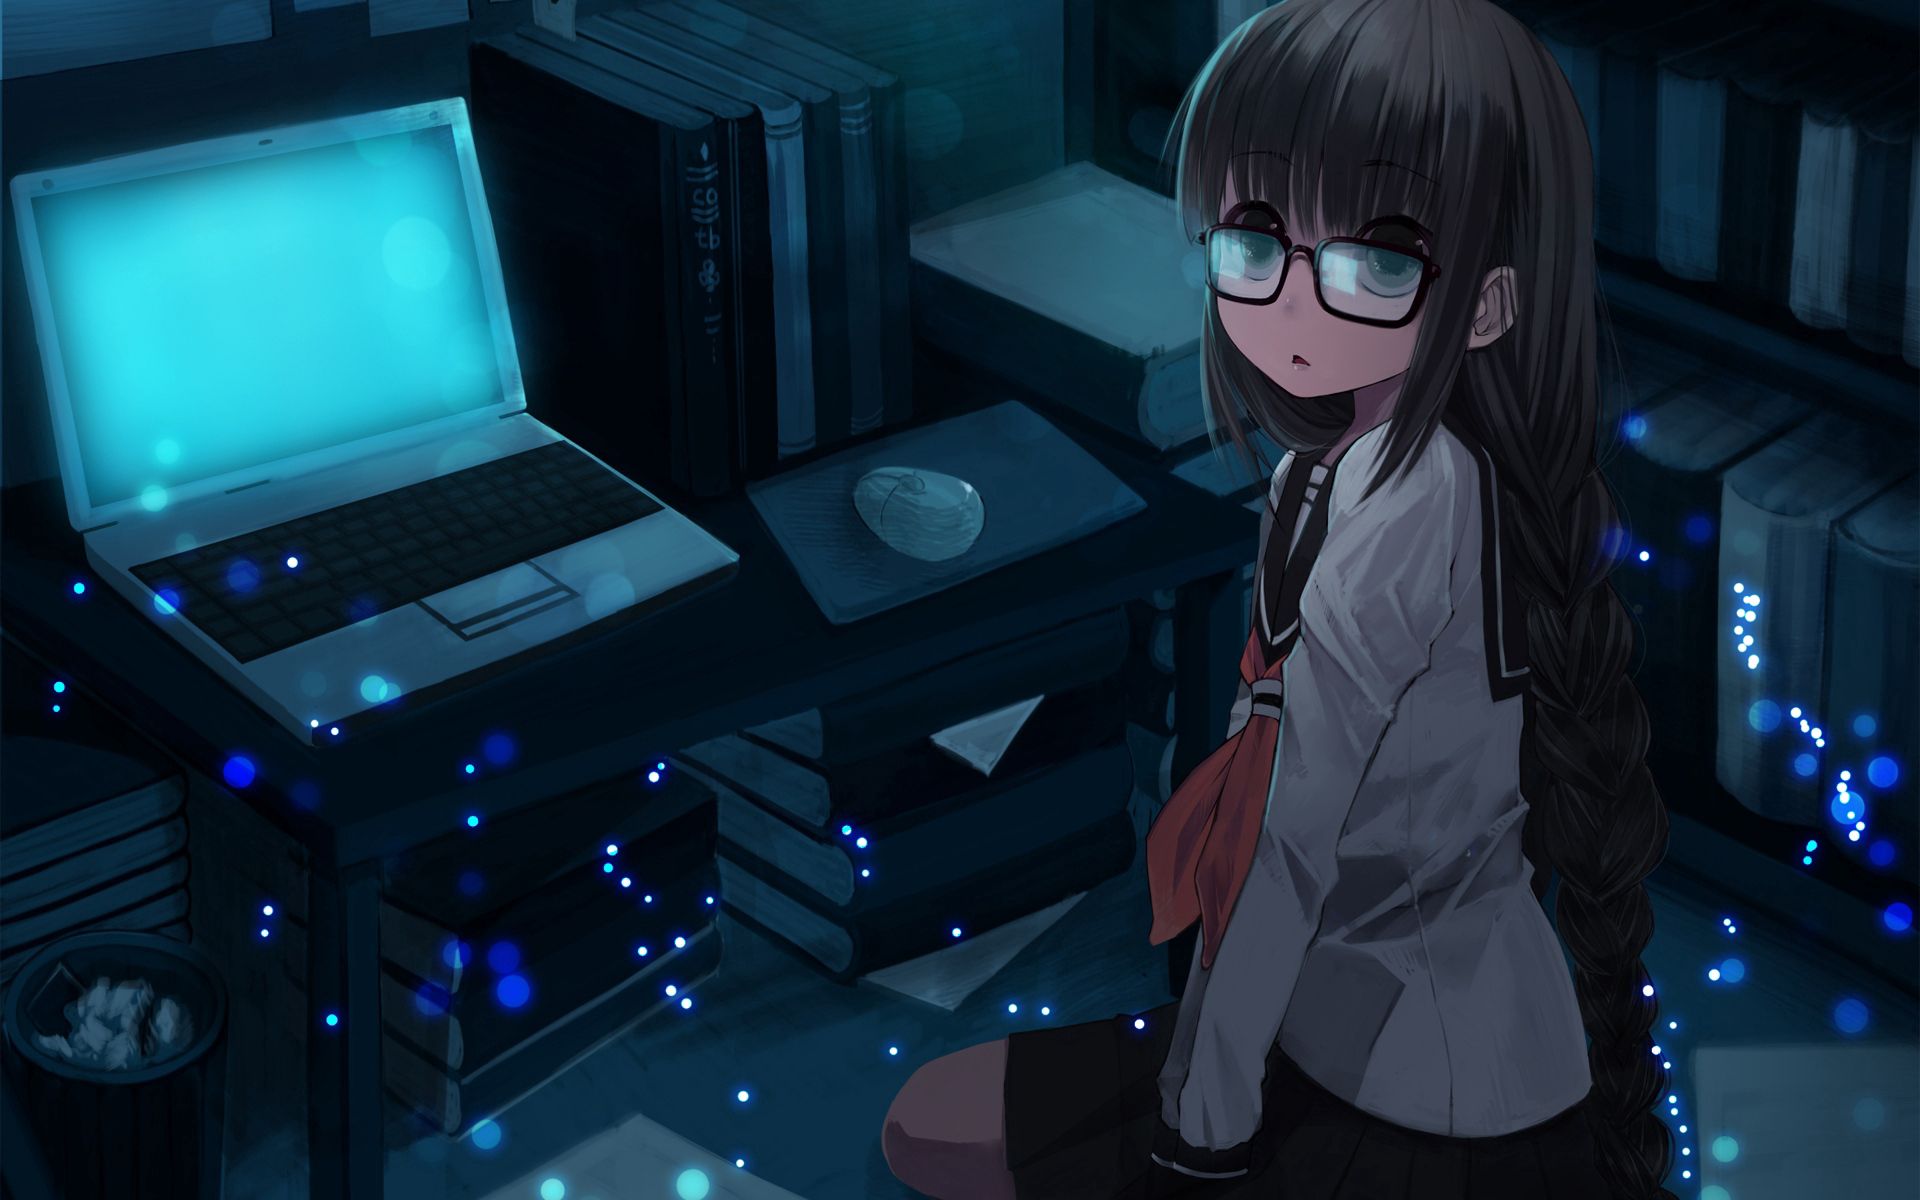 104636 download wallpaper anime, sit, girl, room, notebook, laptop screensavers and pictures for free